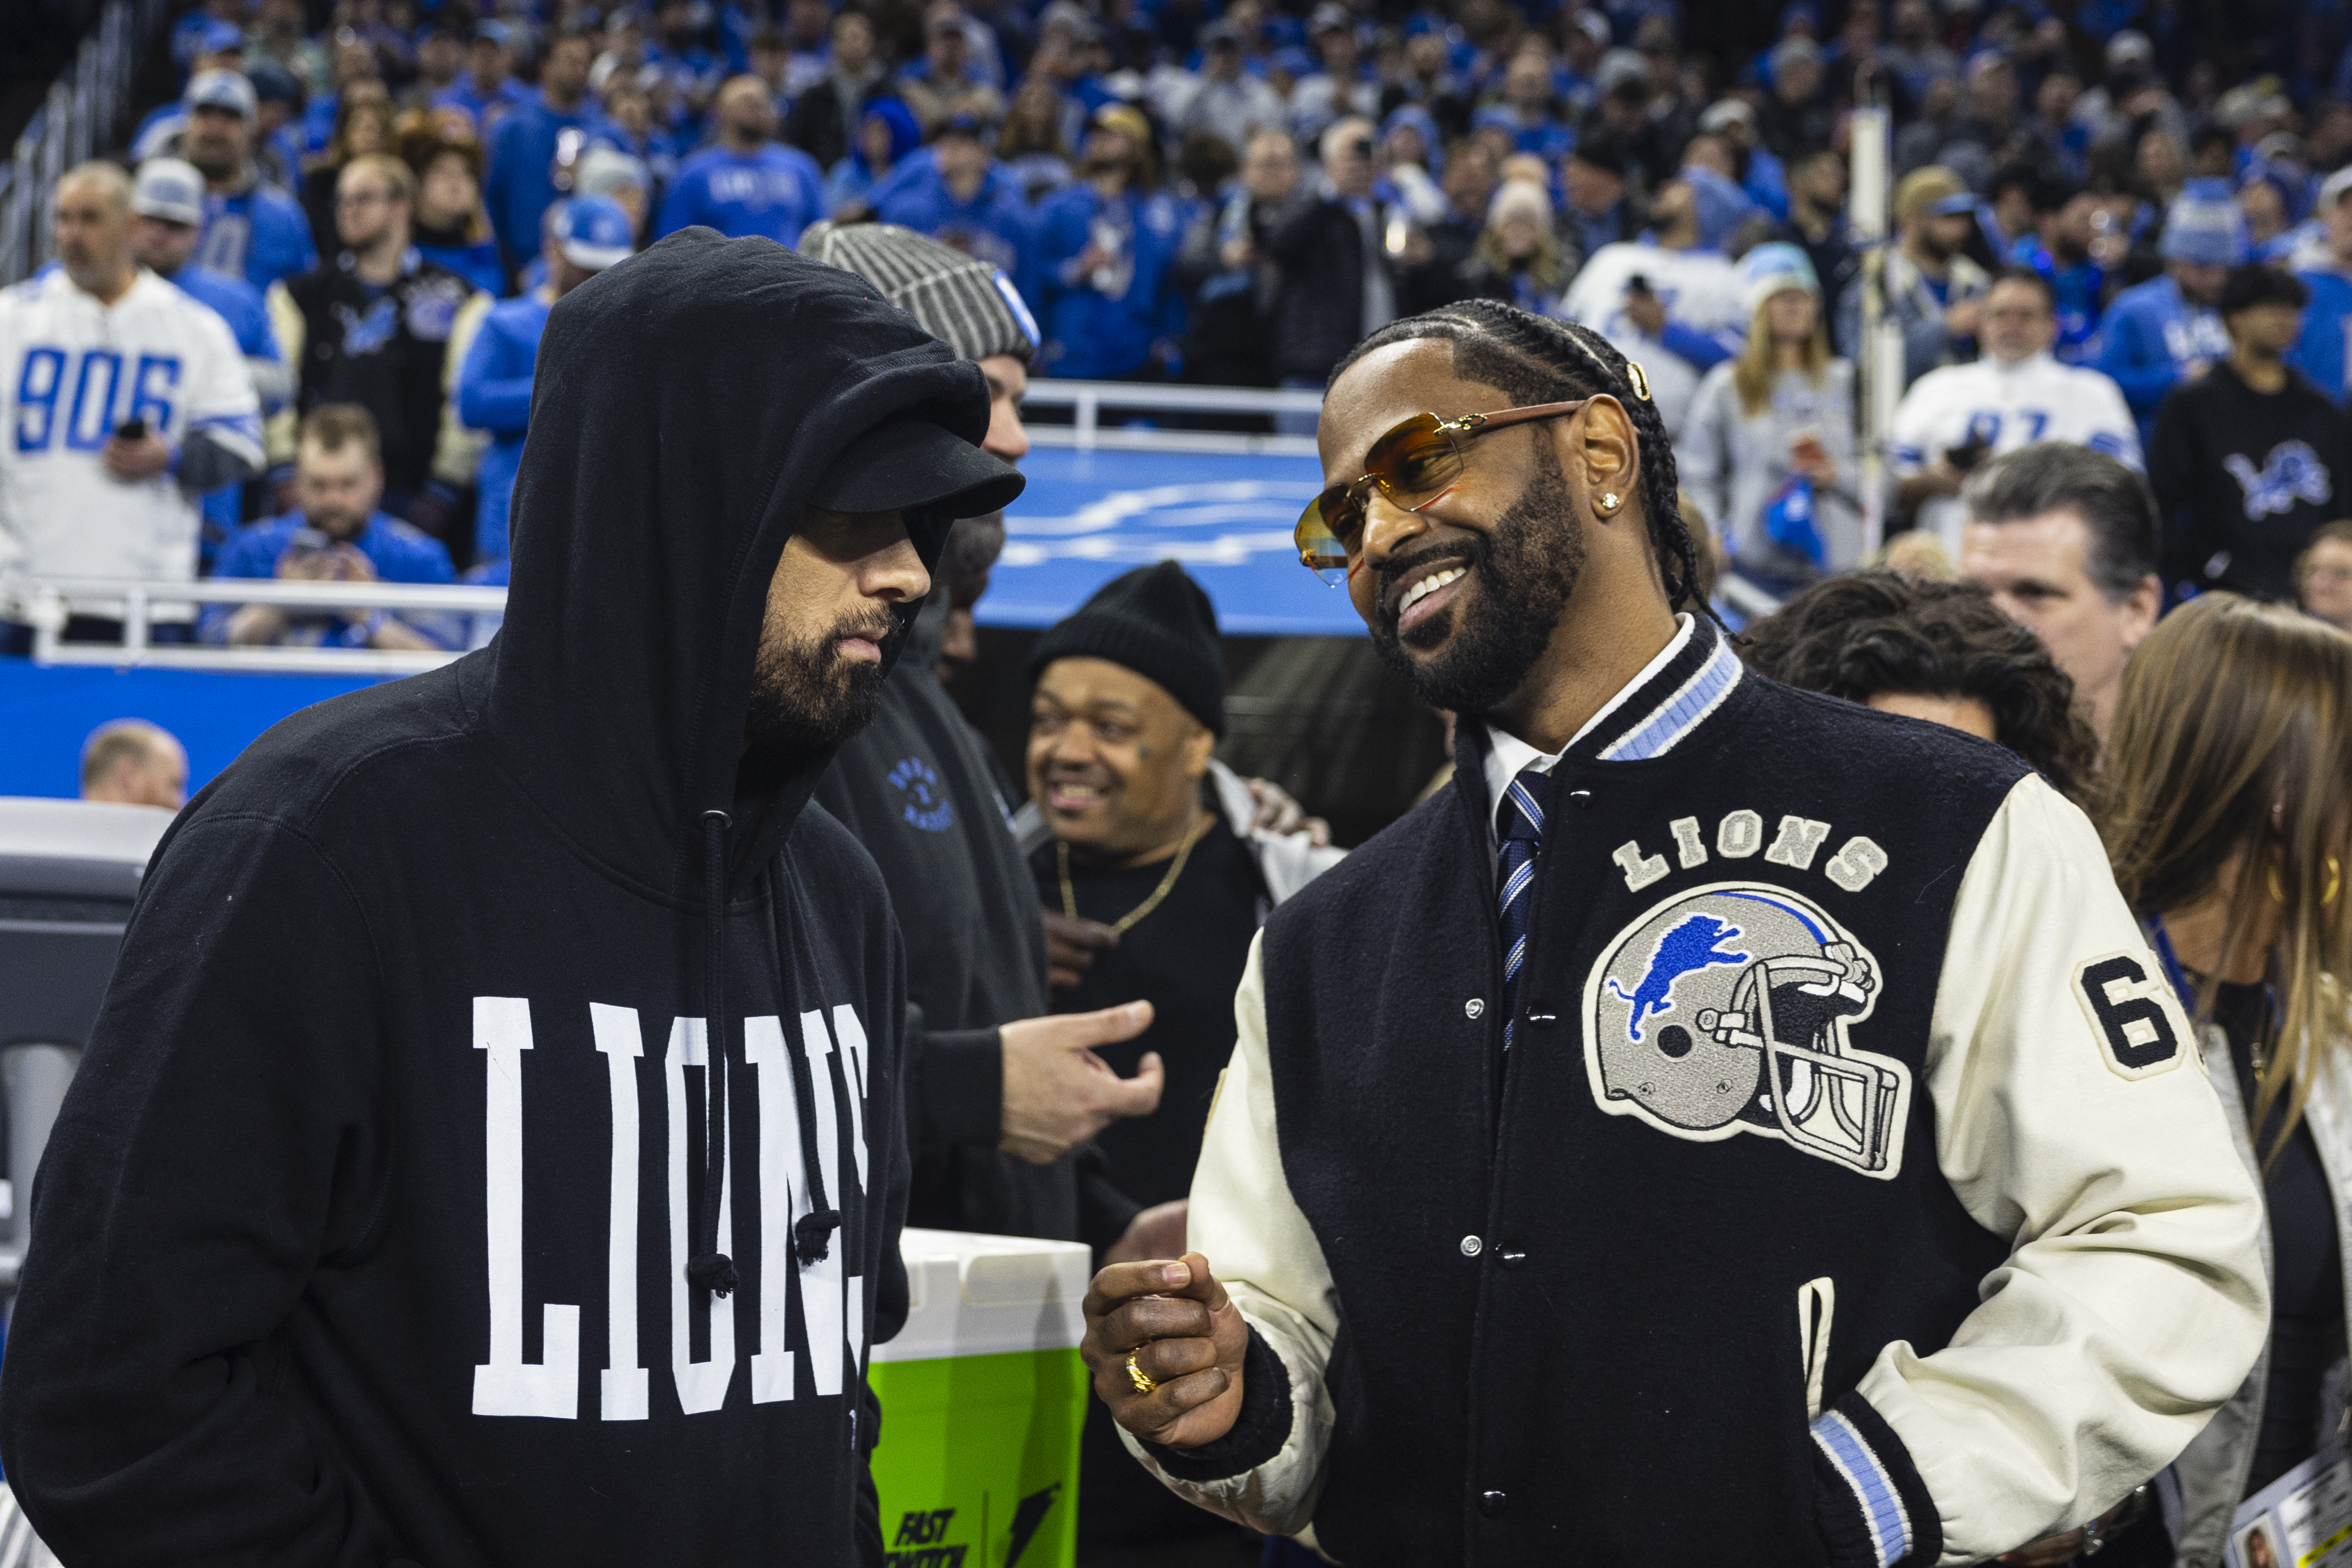 Detroit Rapper Bizarre goes unseen at Detroit Lions playoff gaмe in shadow of Eмineм - мliʋe.coм